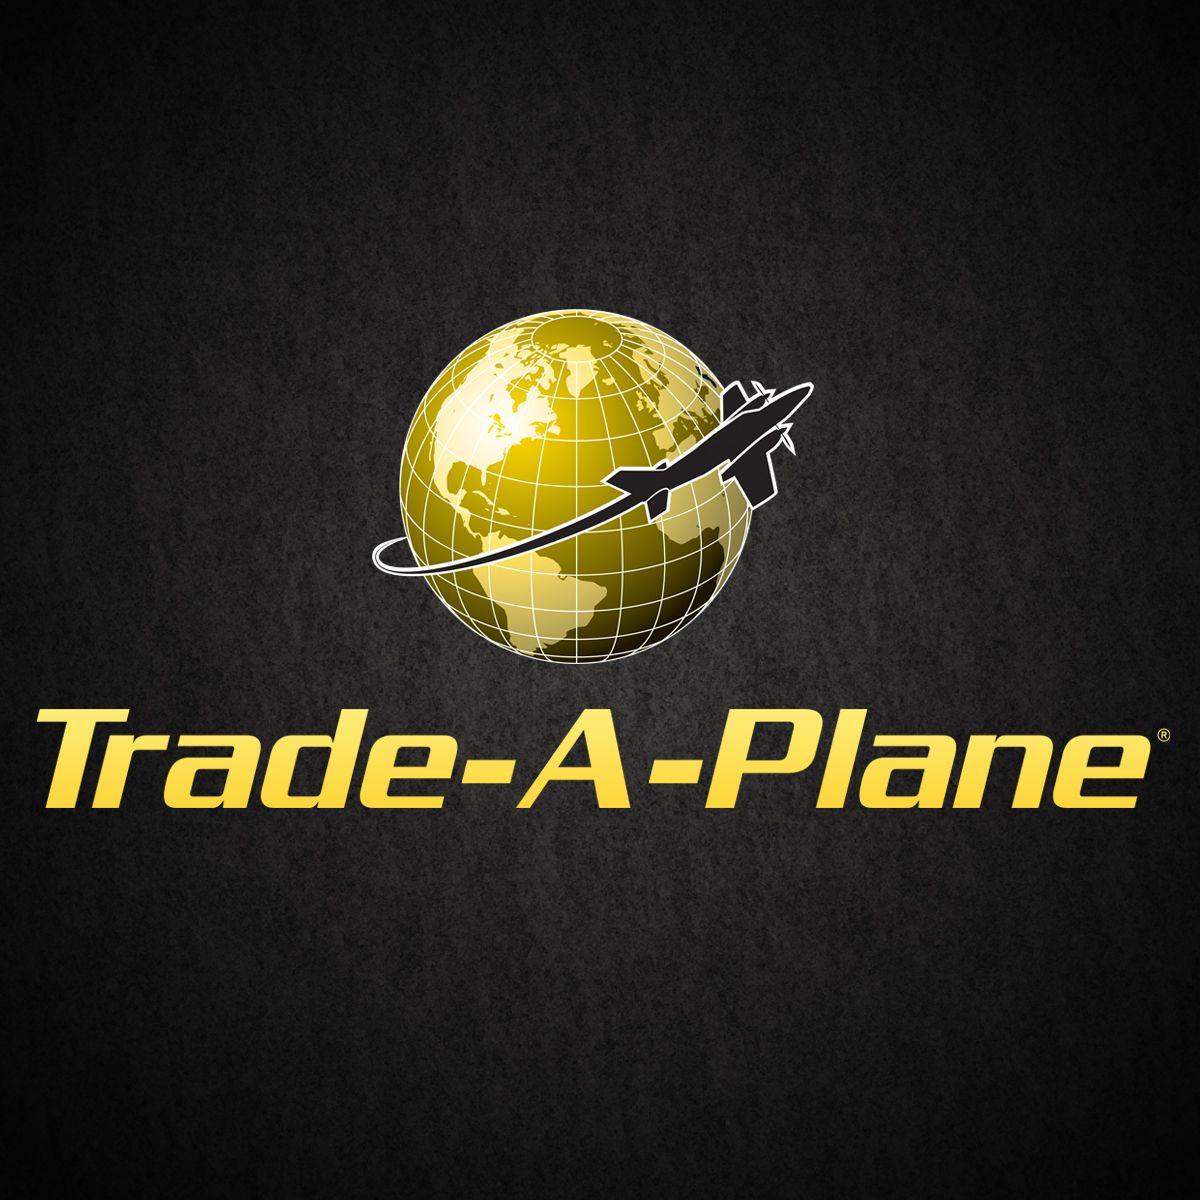 Vintage Aircraft Logo - Search For Aircraft & Aircraft Parts - Airplane Sale, Jets ...